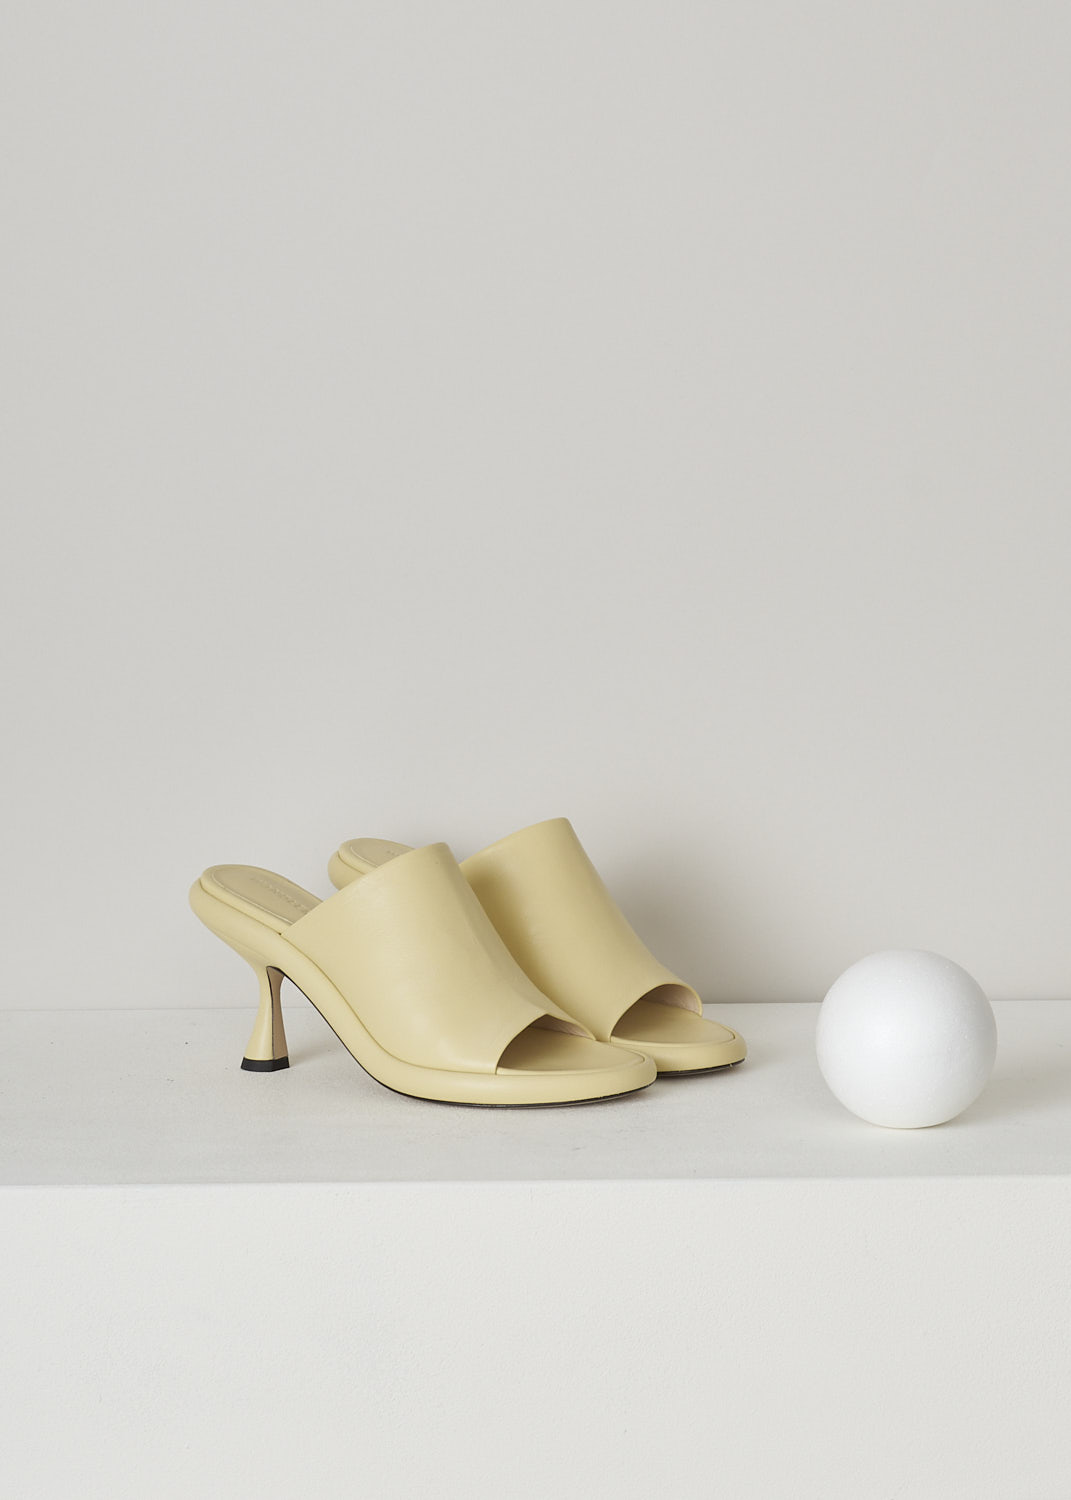 WANDLER, JUNE PLATFORM PUMP IN CANDLE, 22208_871201_1435, Yellow, Front, These pale yellow heeled slip-on mules have a broad strap across the vamp, a rounded open-toe and a platform sole. The slip-on mules have a mid-height spool heel.
